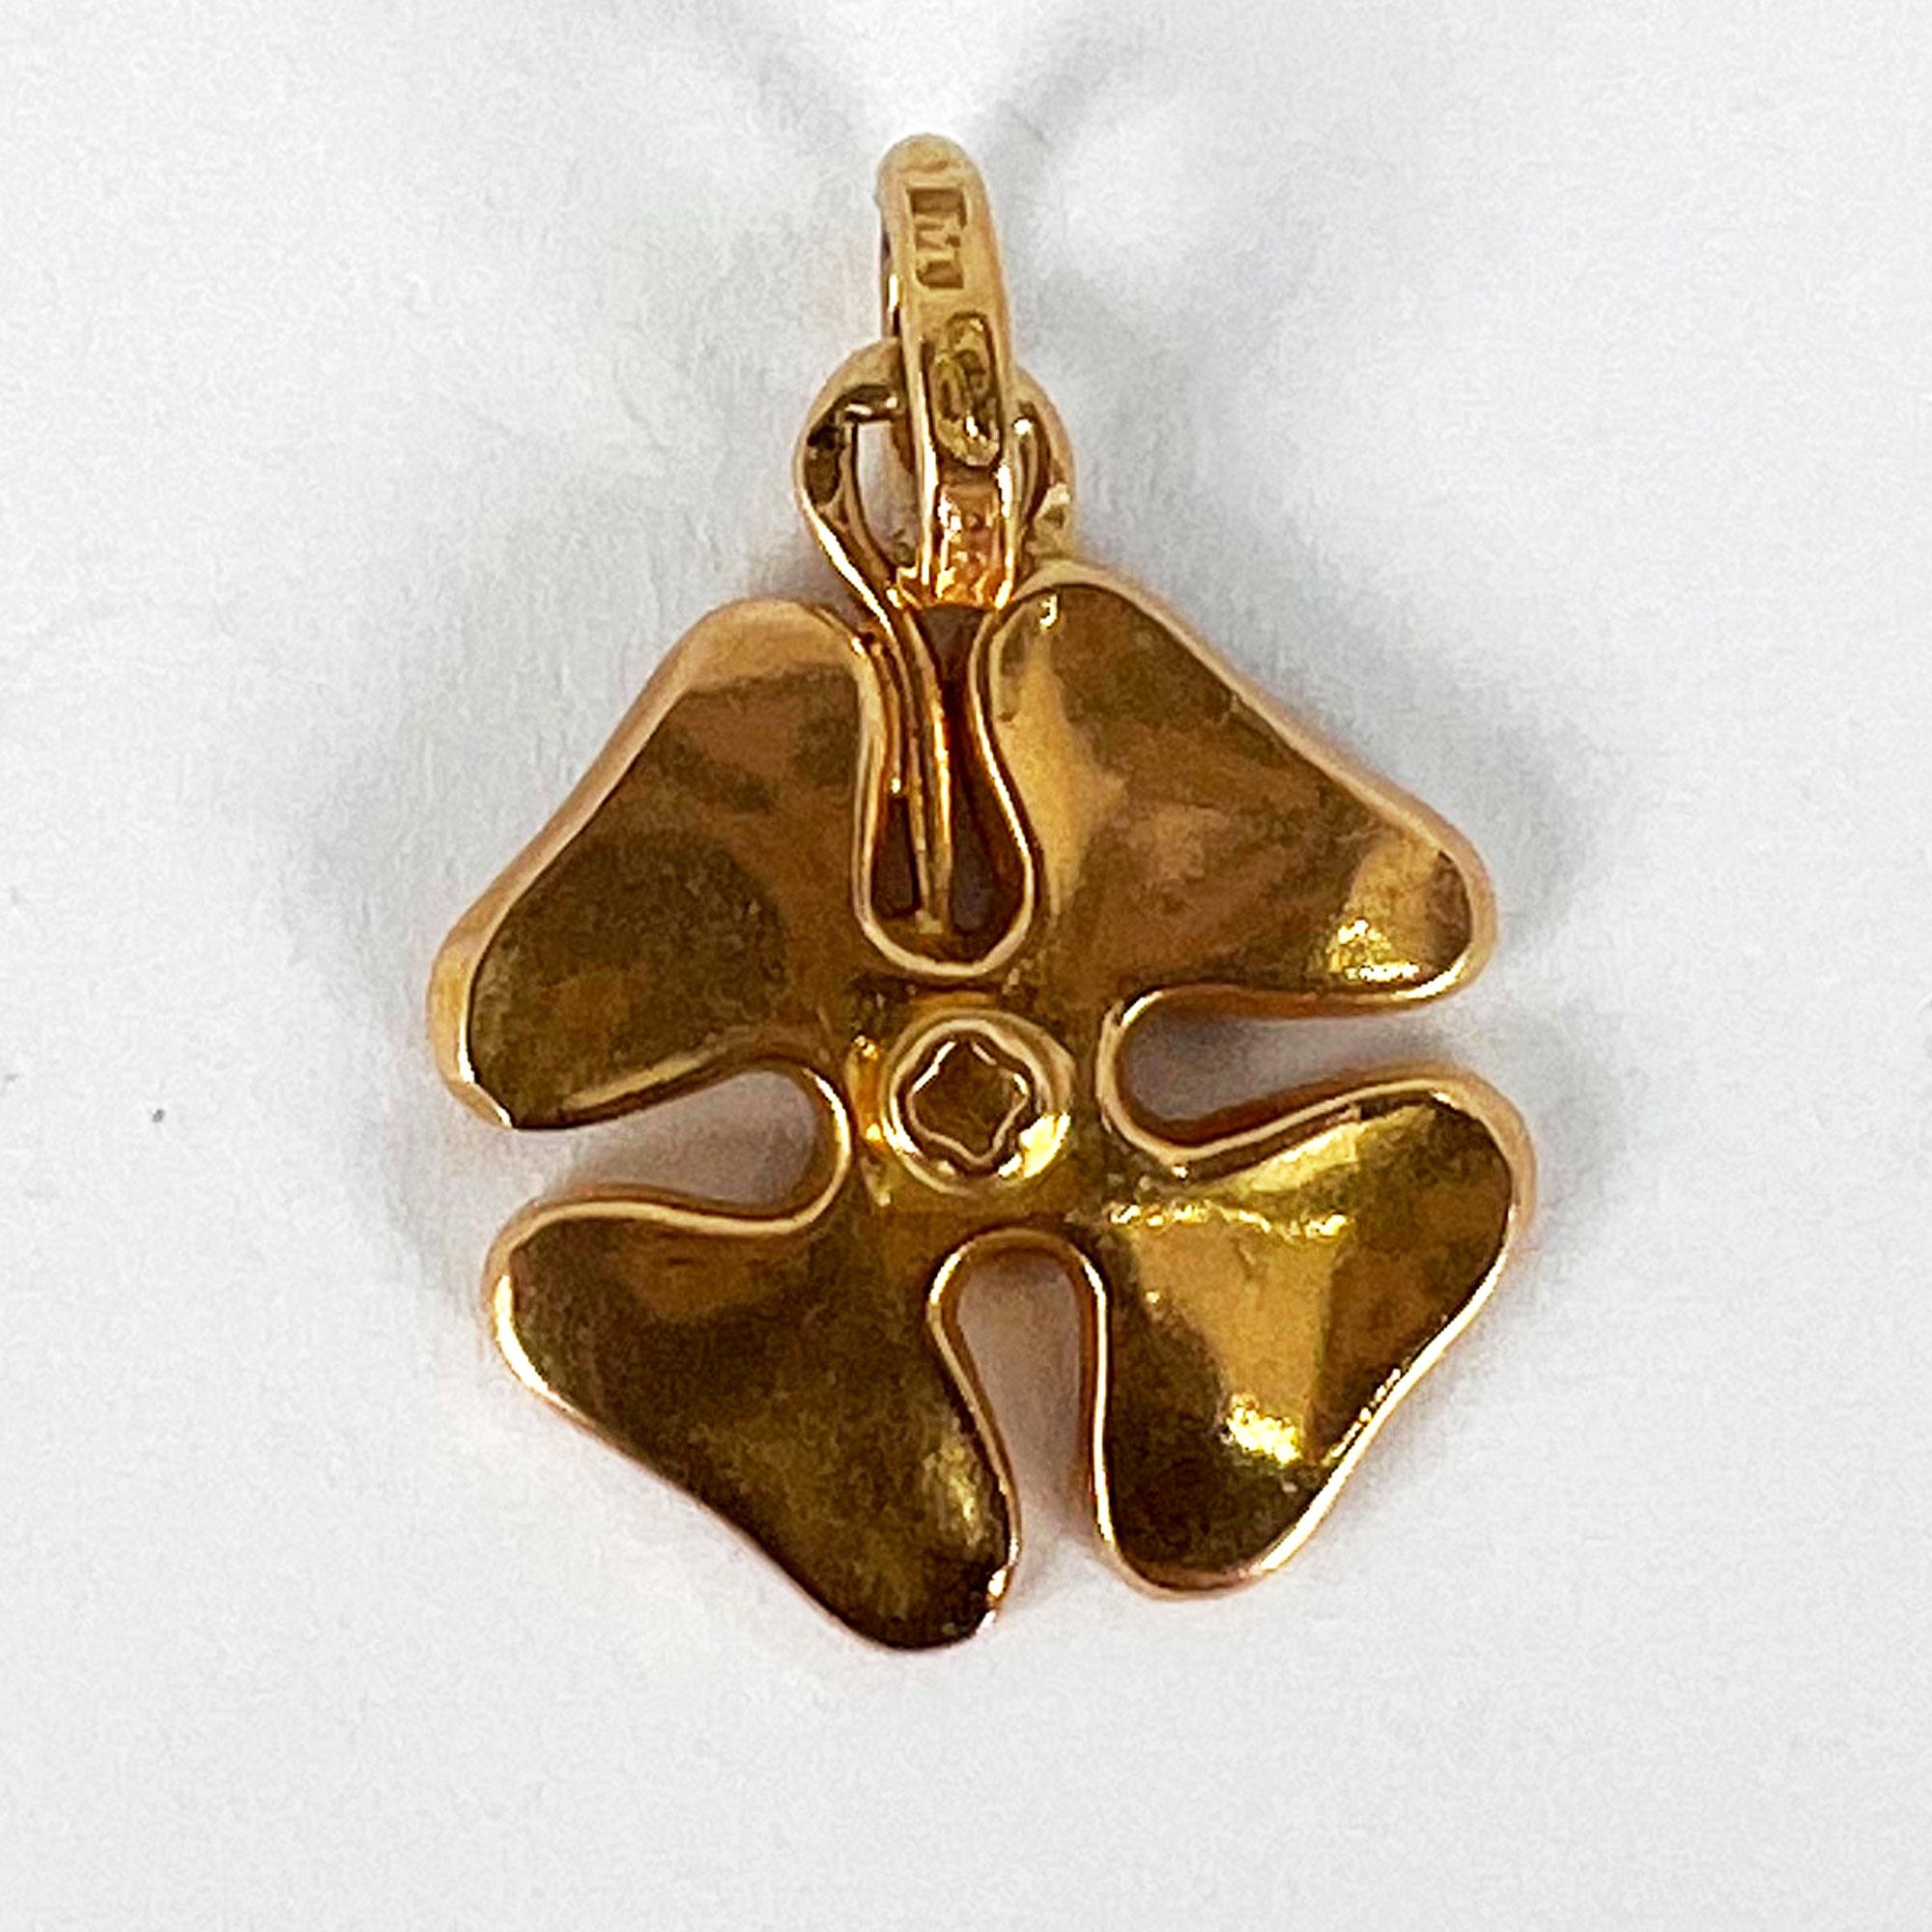 An 18 karat (18K) yellow gold charm pendant designed as a lucky clover or shamrock, engraved 1918 to mark the end of World War One with the initials BA. Stamped 18ct to the jump ring for 18 karat gold.
 
Dimensions: 1.8 x 1.5 x 0.2 cm (not including